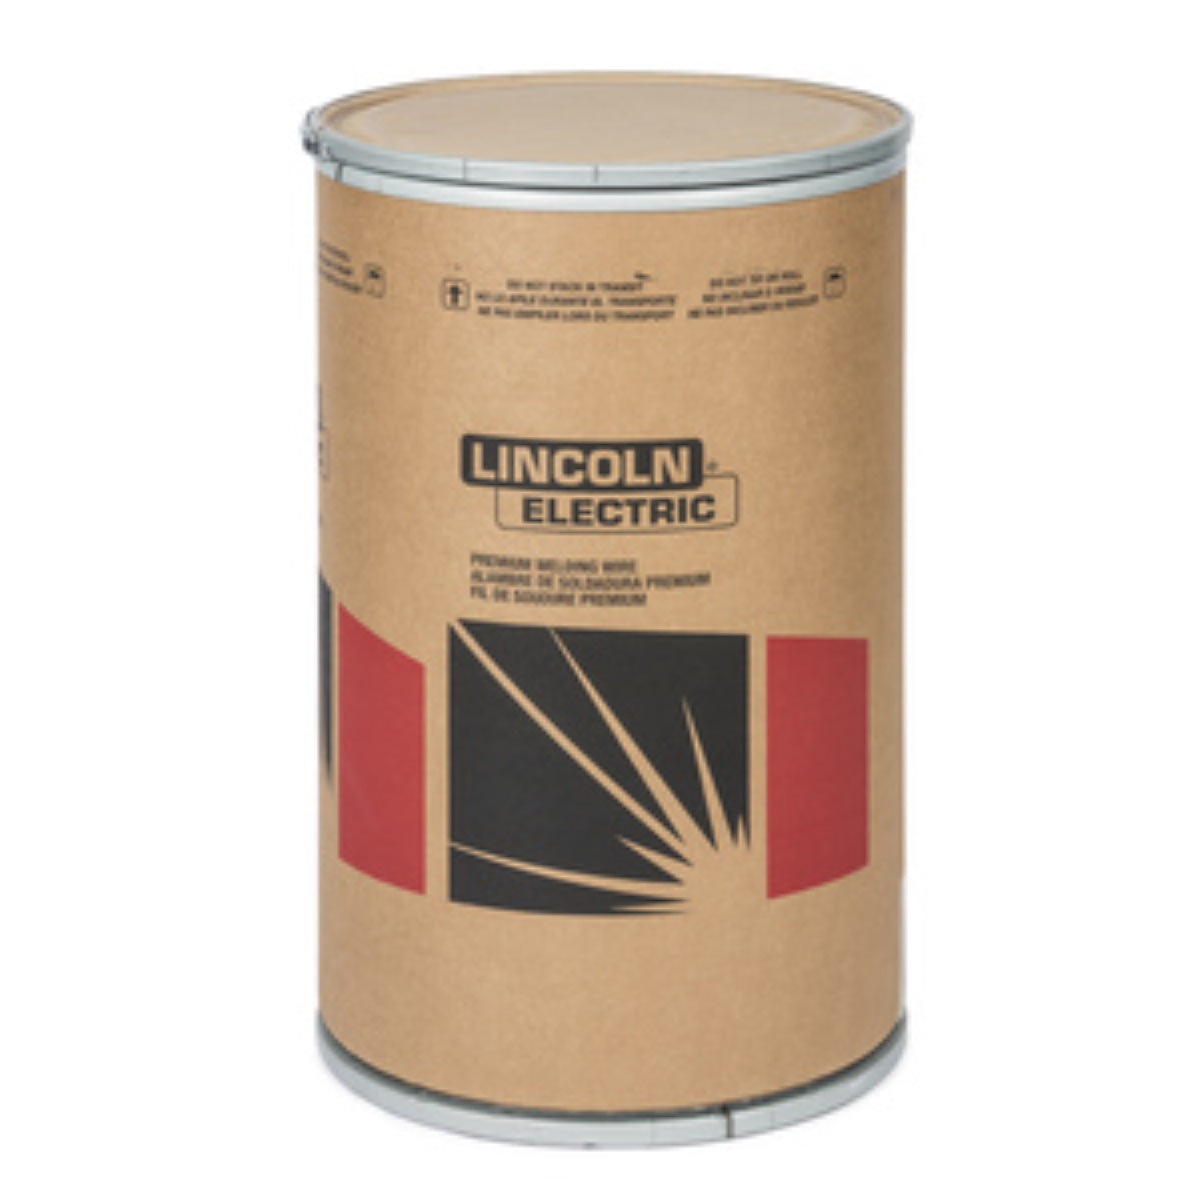 Lincoln Murex 309LSI Stainless MIG Wire .035 500lb Drum (ED0035609)